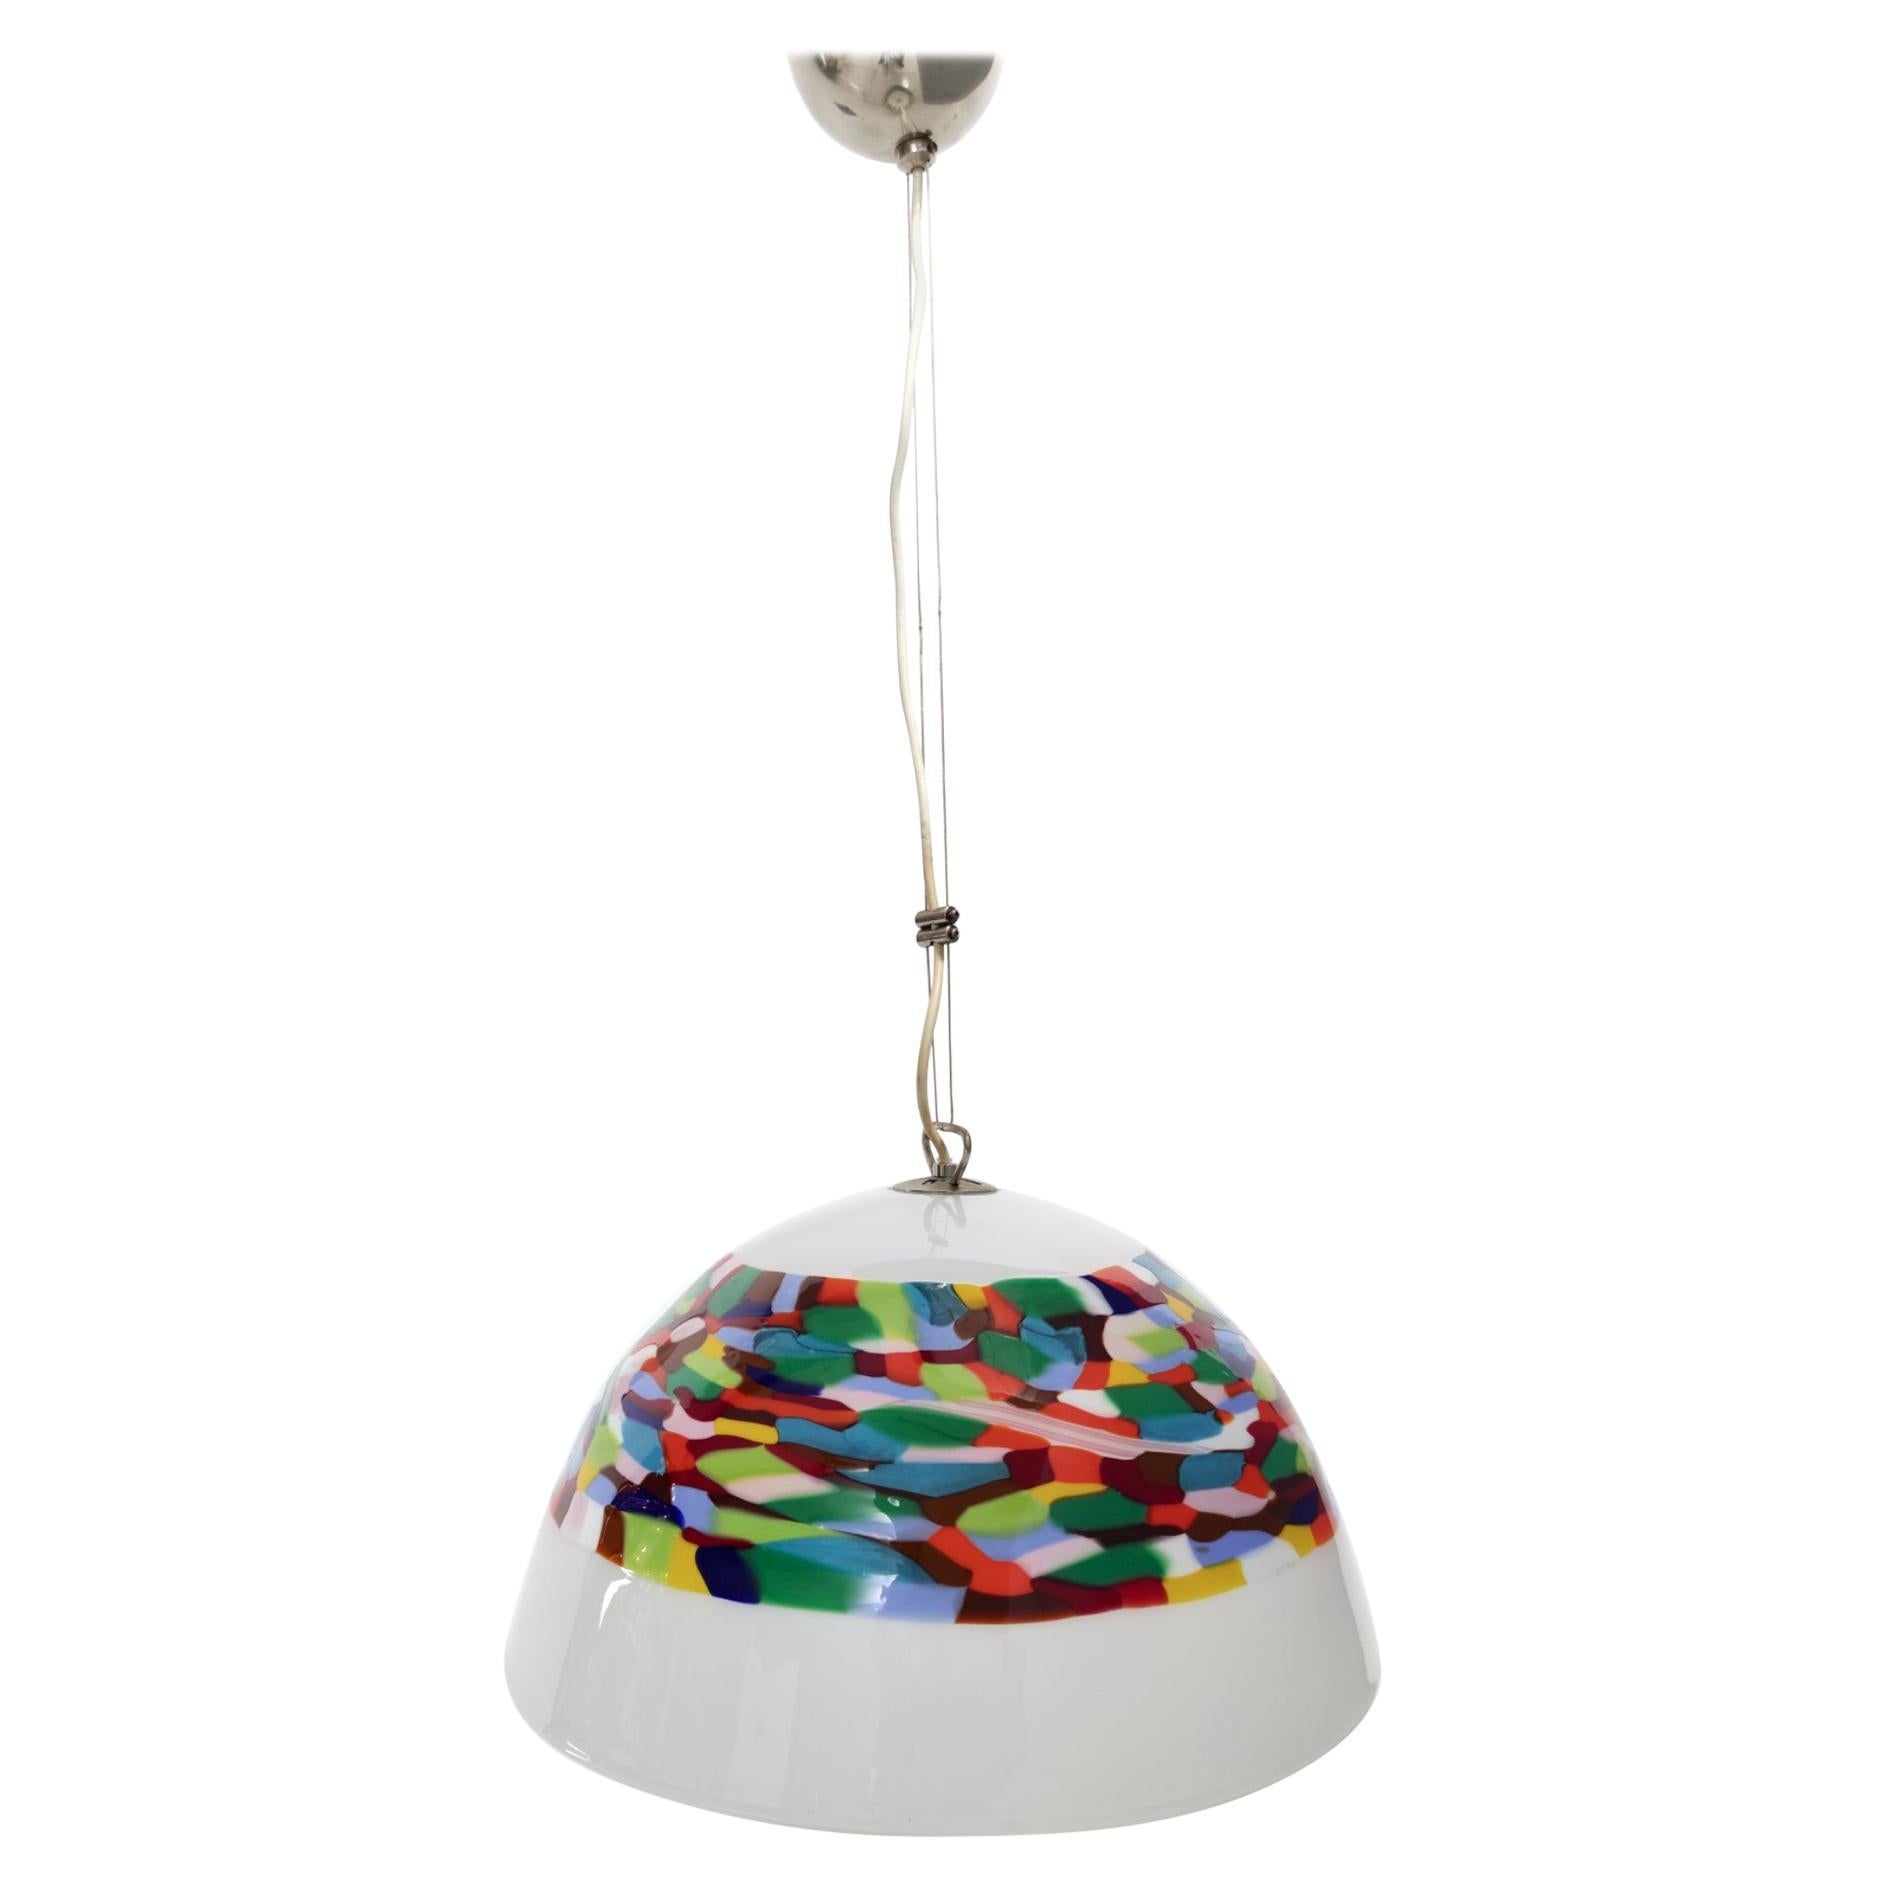 White and Colored Blown Glass and Chrome-Plated Metal Pendant by La Murrina For Sale